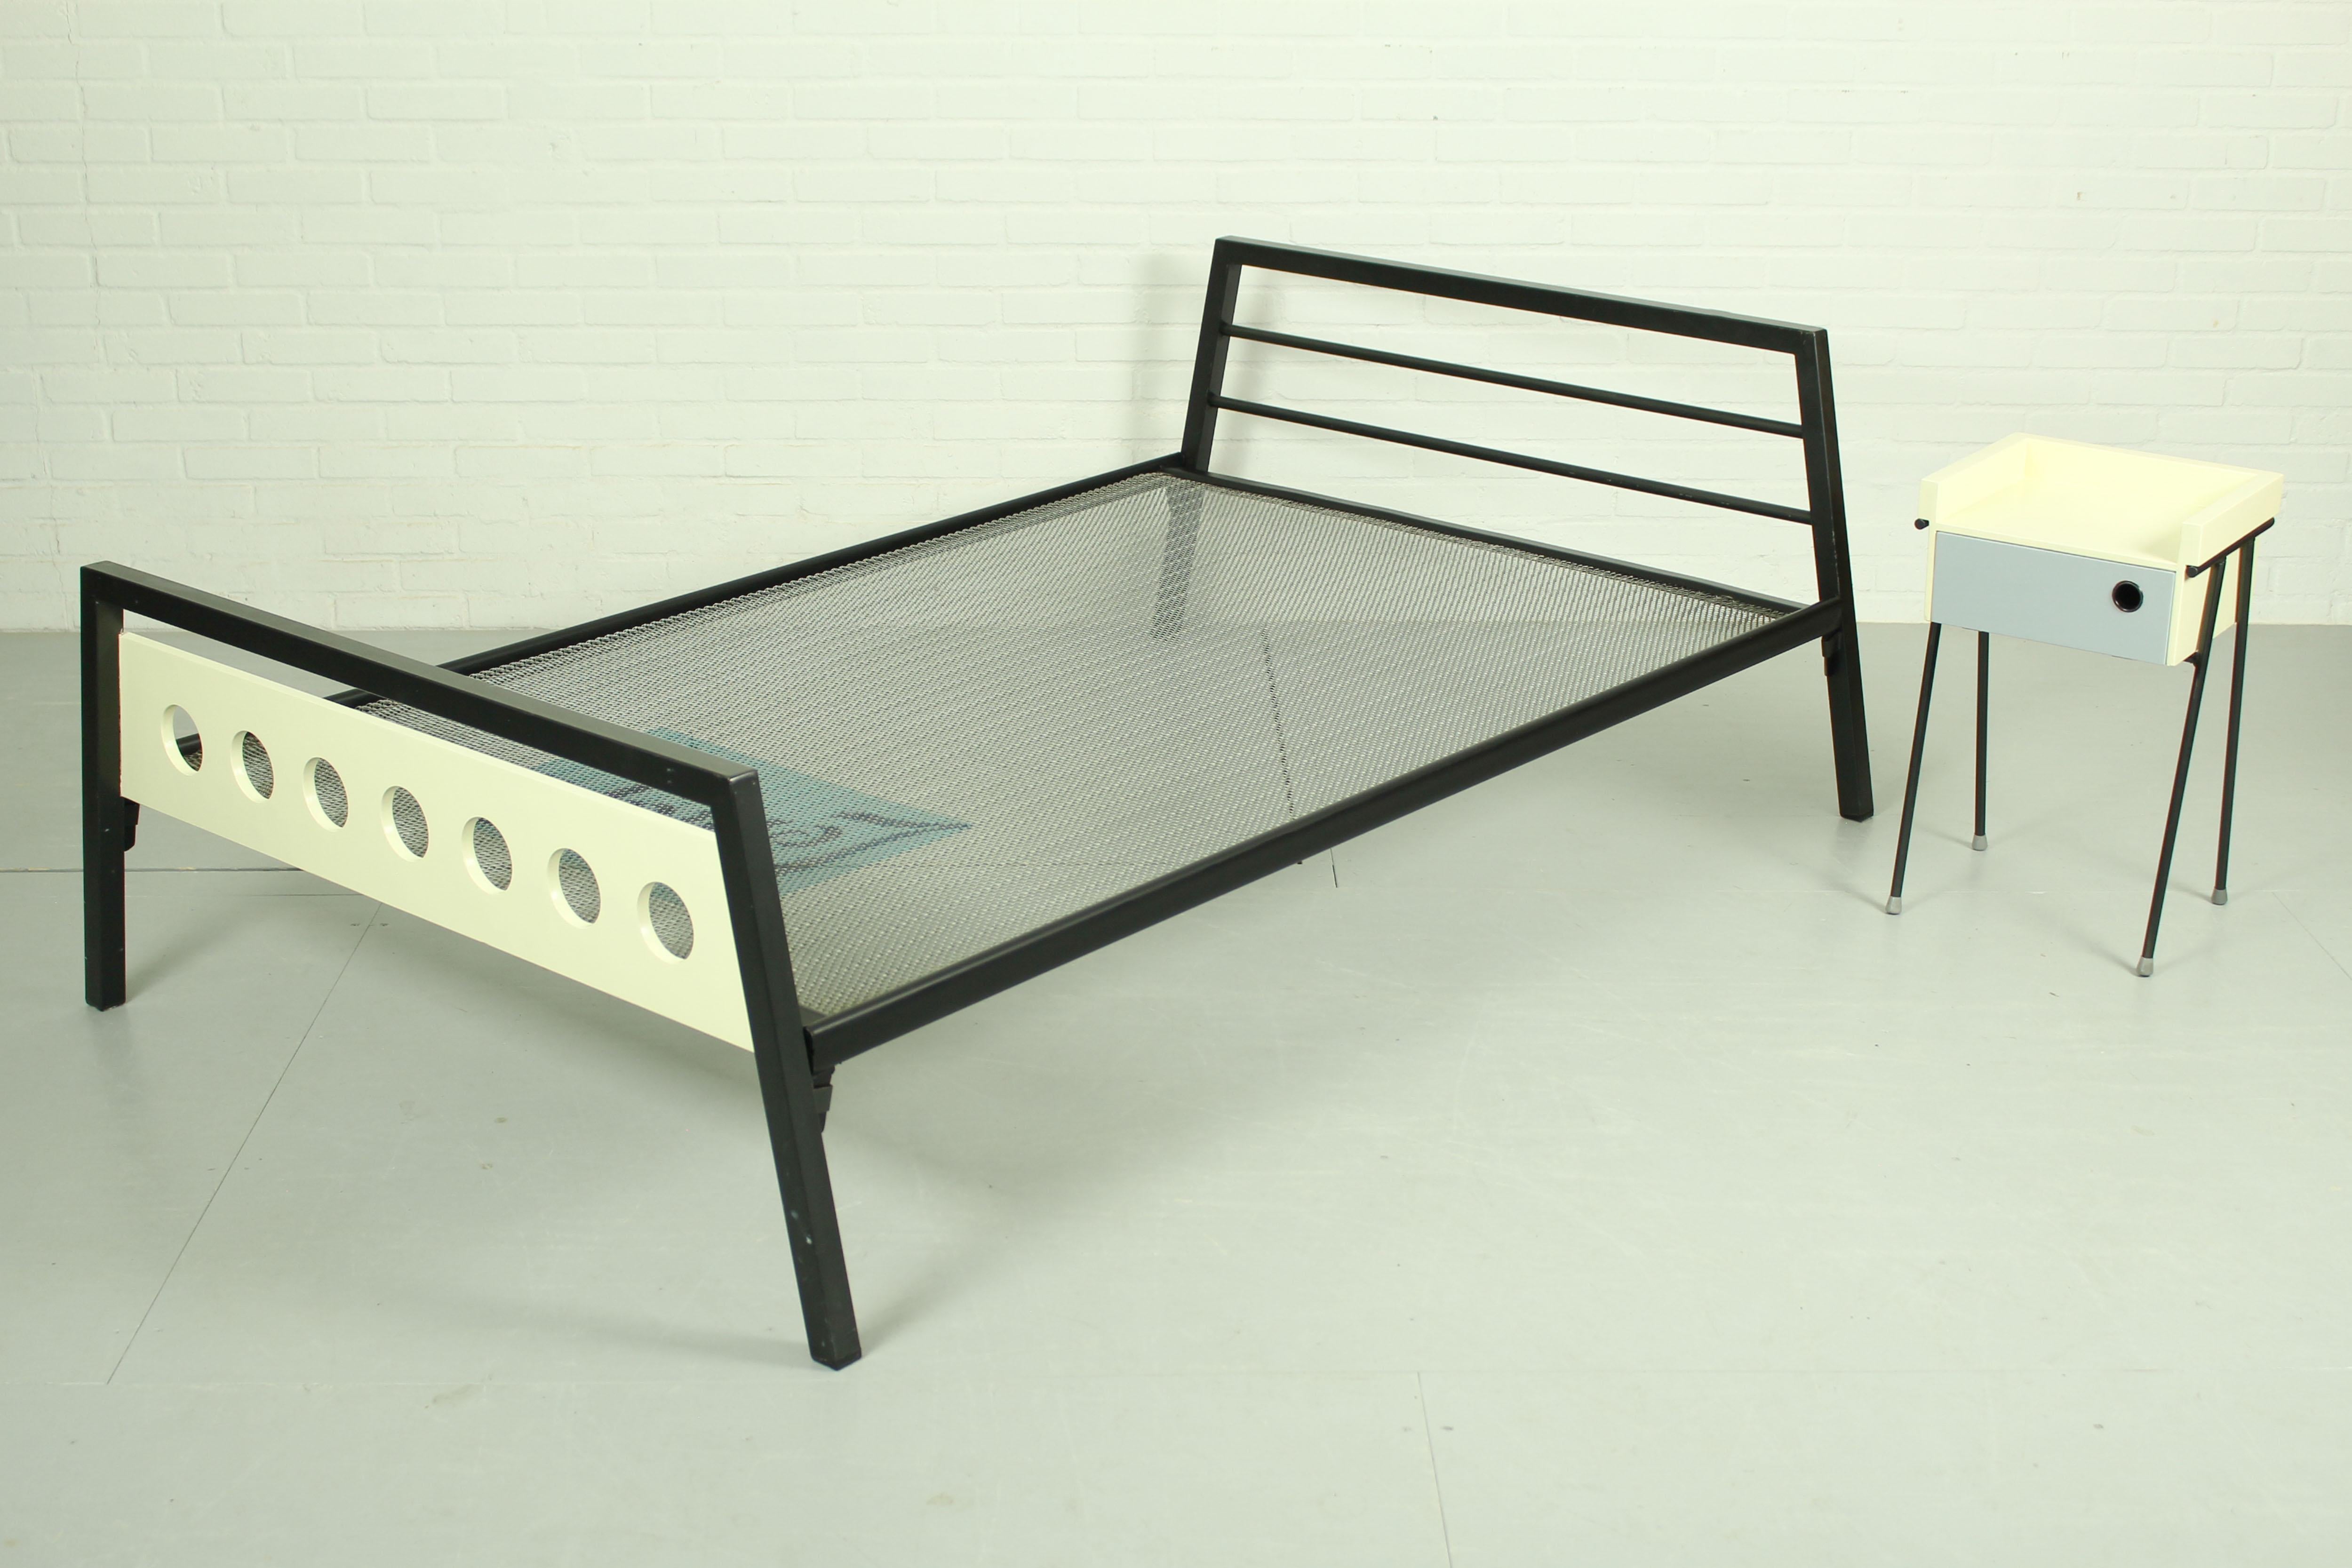 20th Century Rob Parry and Emile Truijen Bed, Chair and Nightstand for Dico series 